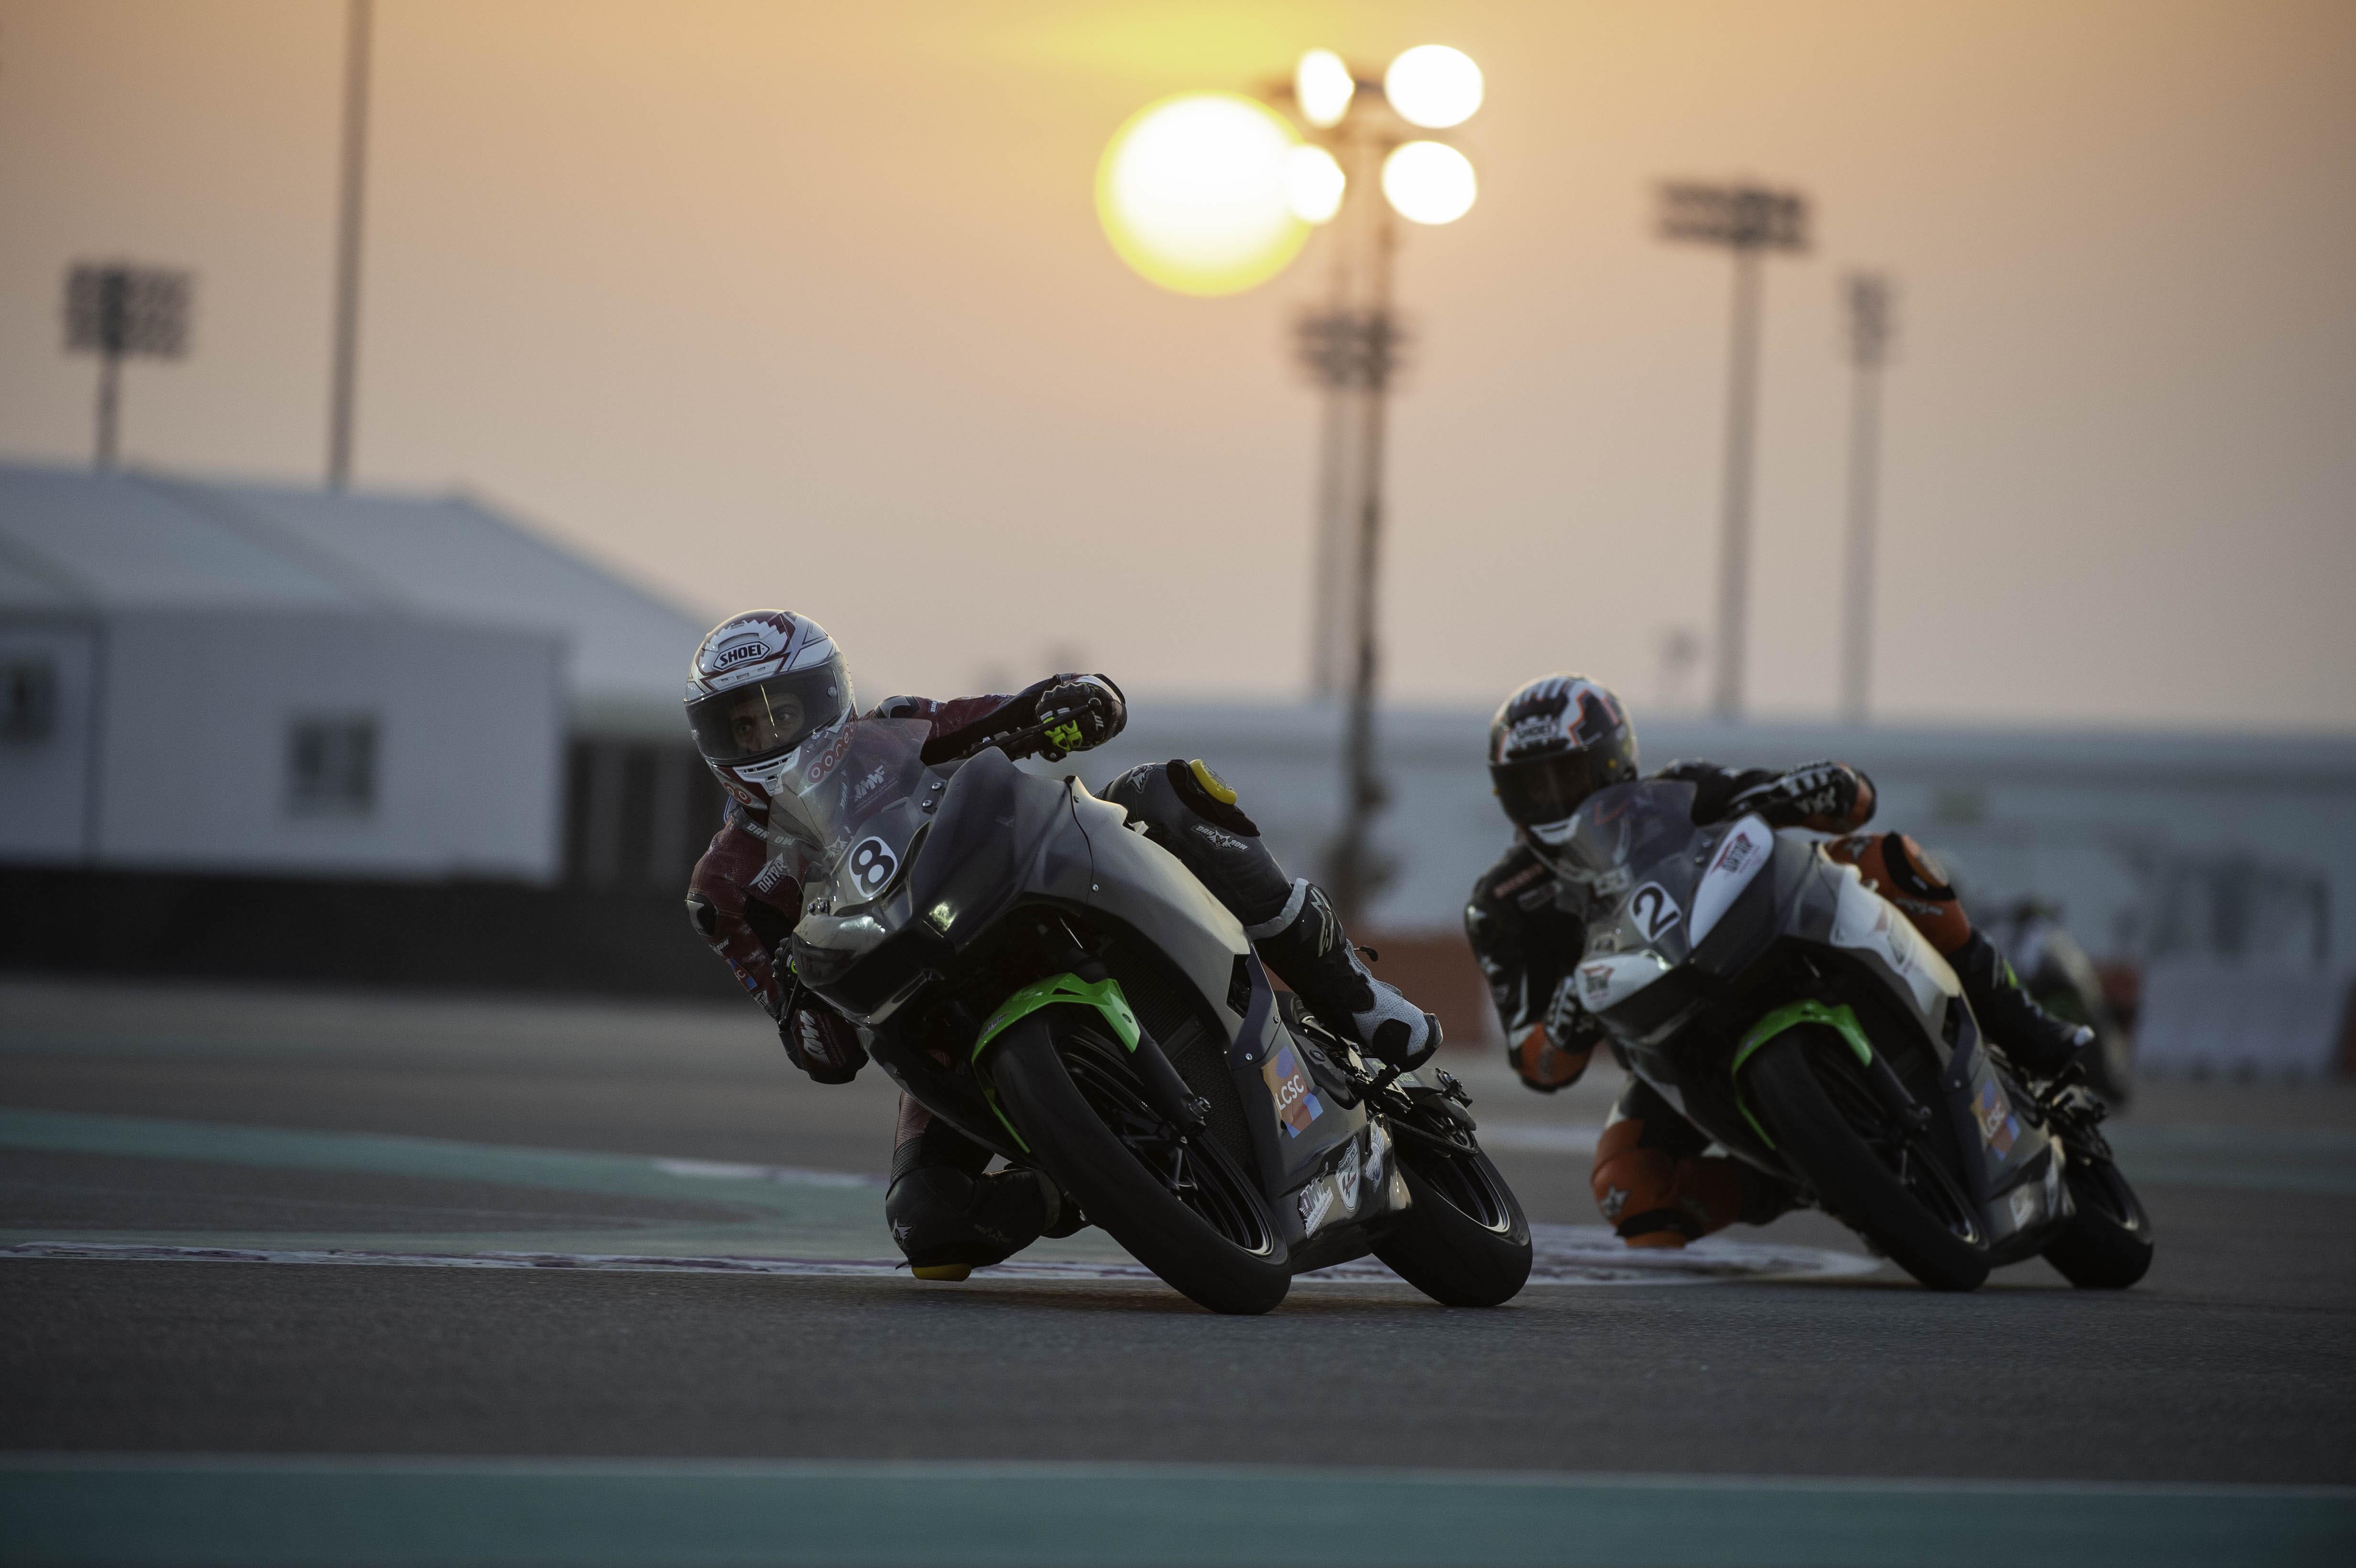 Lusail Circuit Sports Club is ready to resume the motorsport activities